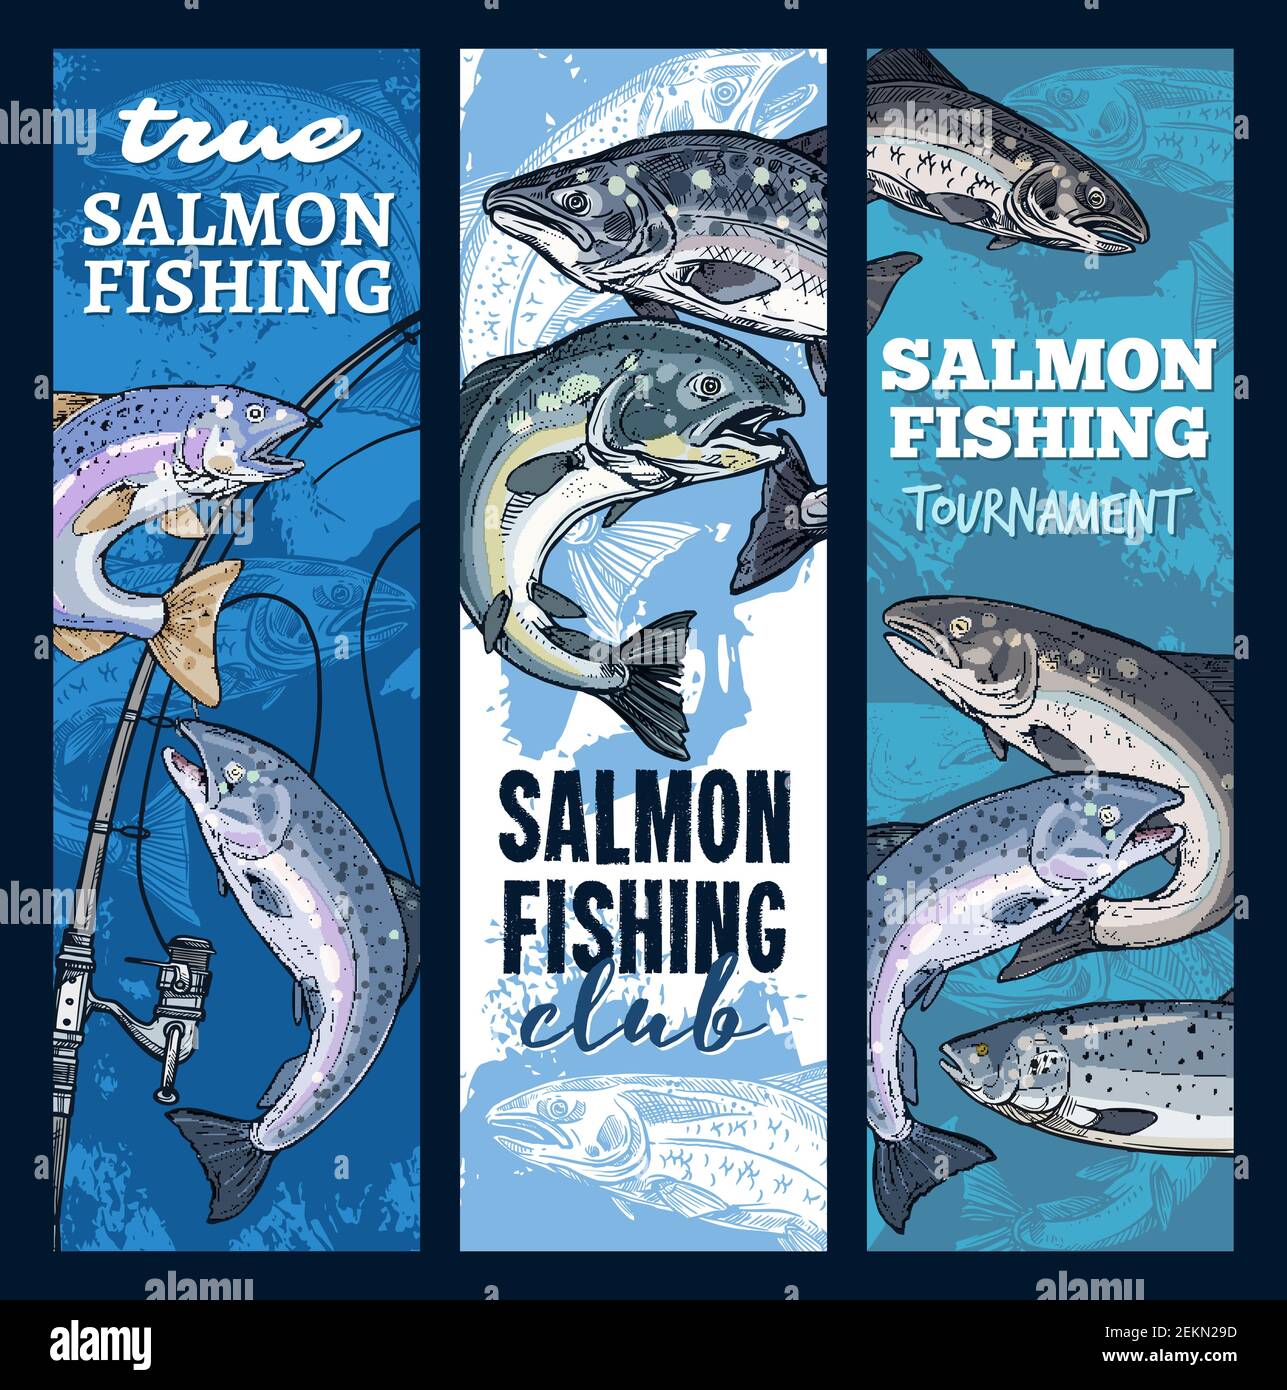 https://c8.alamy.com/comp/2EKN29D/salmon-fishing-sport-club-or-tournament-vector-fishery-gear-rods-and-fish-catched-on-hook-fisherman-spinning-pink-salmon-sketch-humpback-fish-u-2EKN29D.jpg